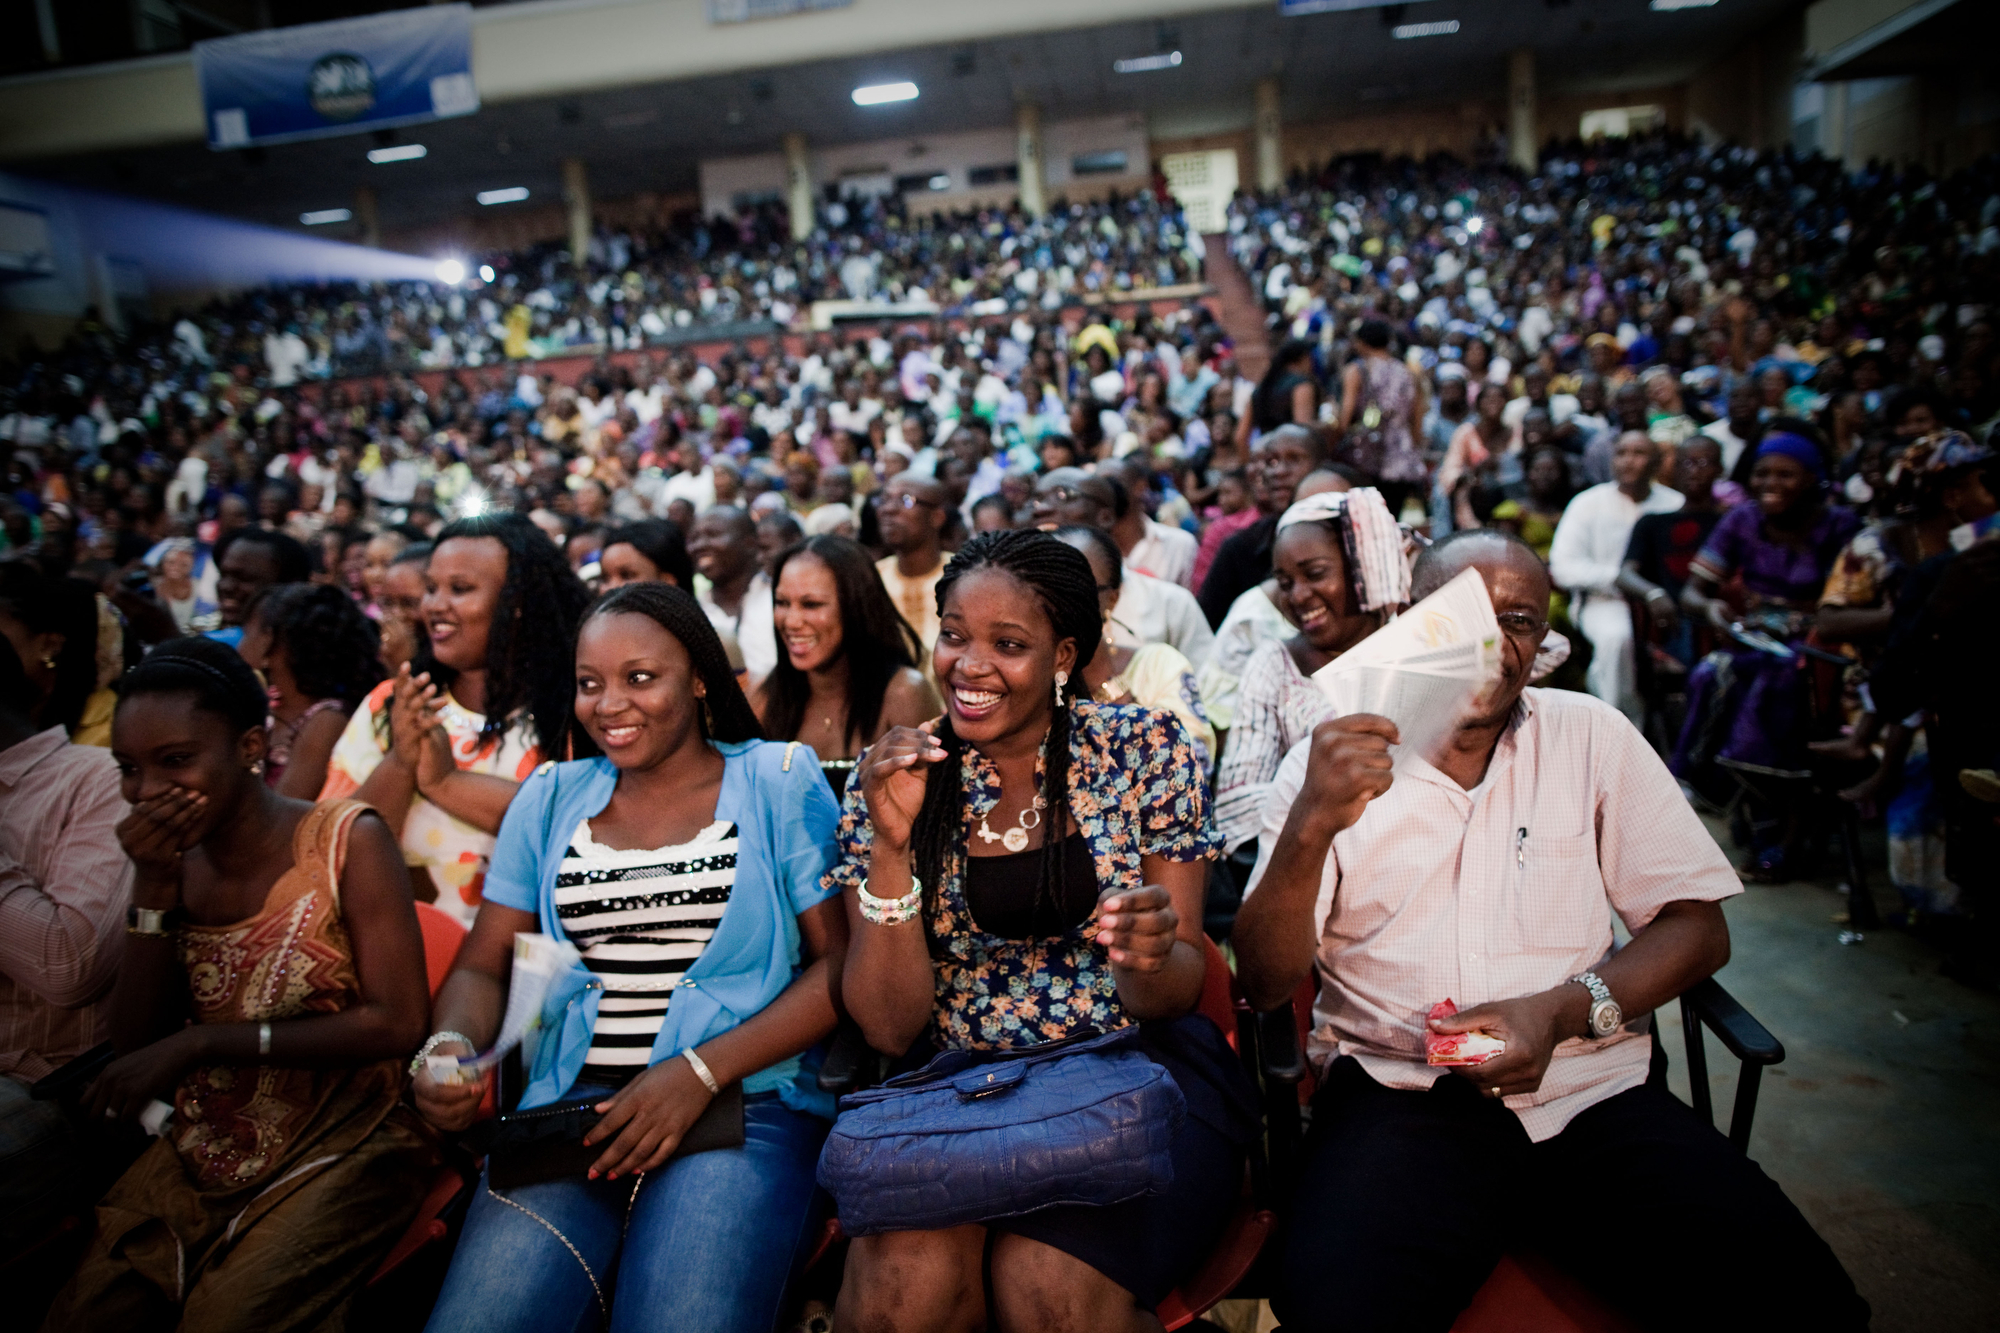  Bamako, Mali. SEPTEMBER 2013. A large crowd of men and women at a comedy show in Bamako, Mali. 

Summary: Mali, a predominantly Muslim country, has been known for it�s vibrant culture, rich ancient Islamic history, religious tolerance and joyful mus